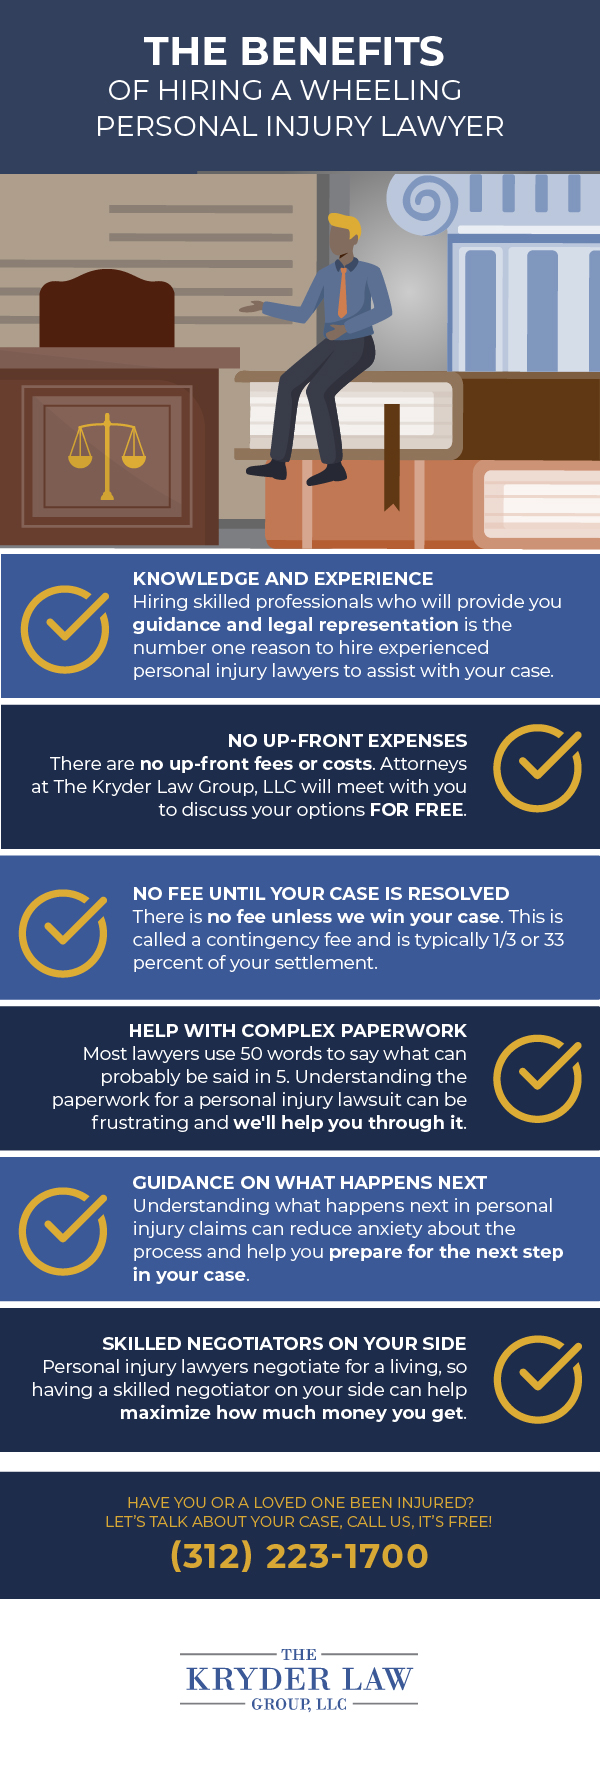 The Benefits of Hiring a Wheeling Personal Injury Lawyer Infographic